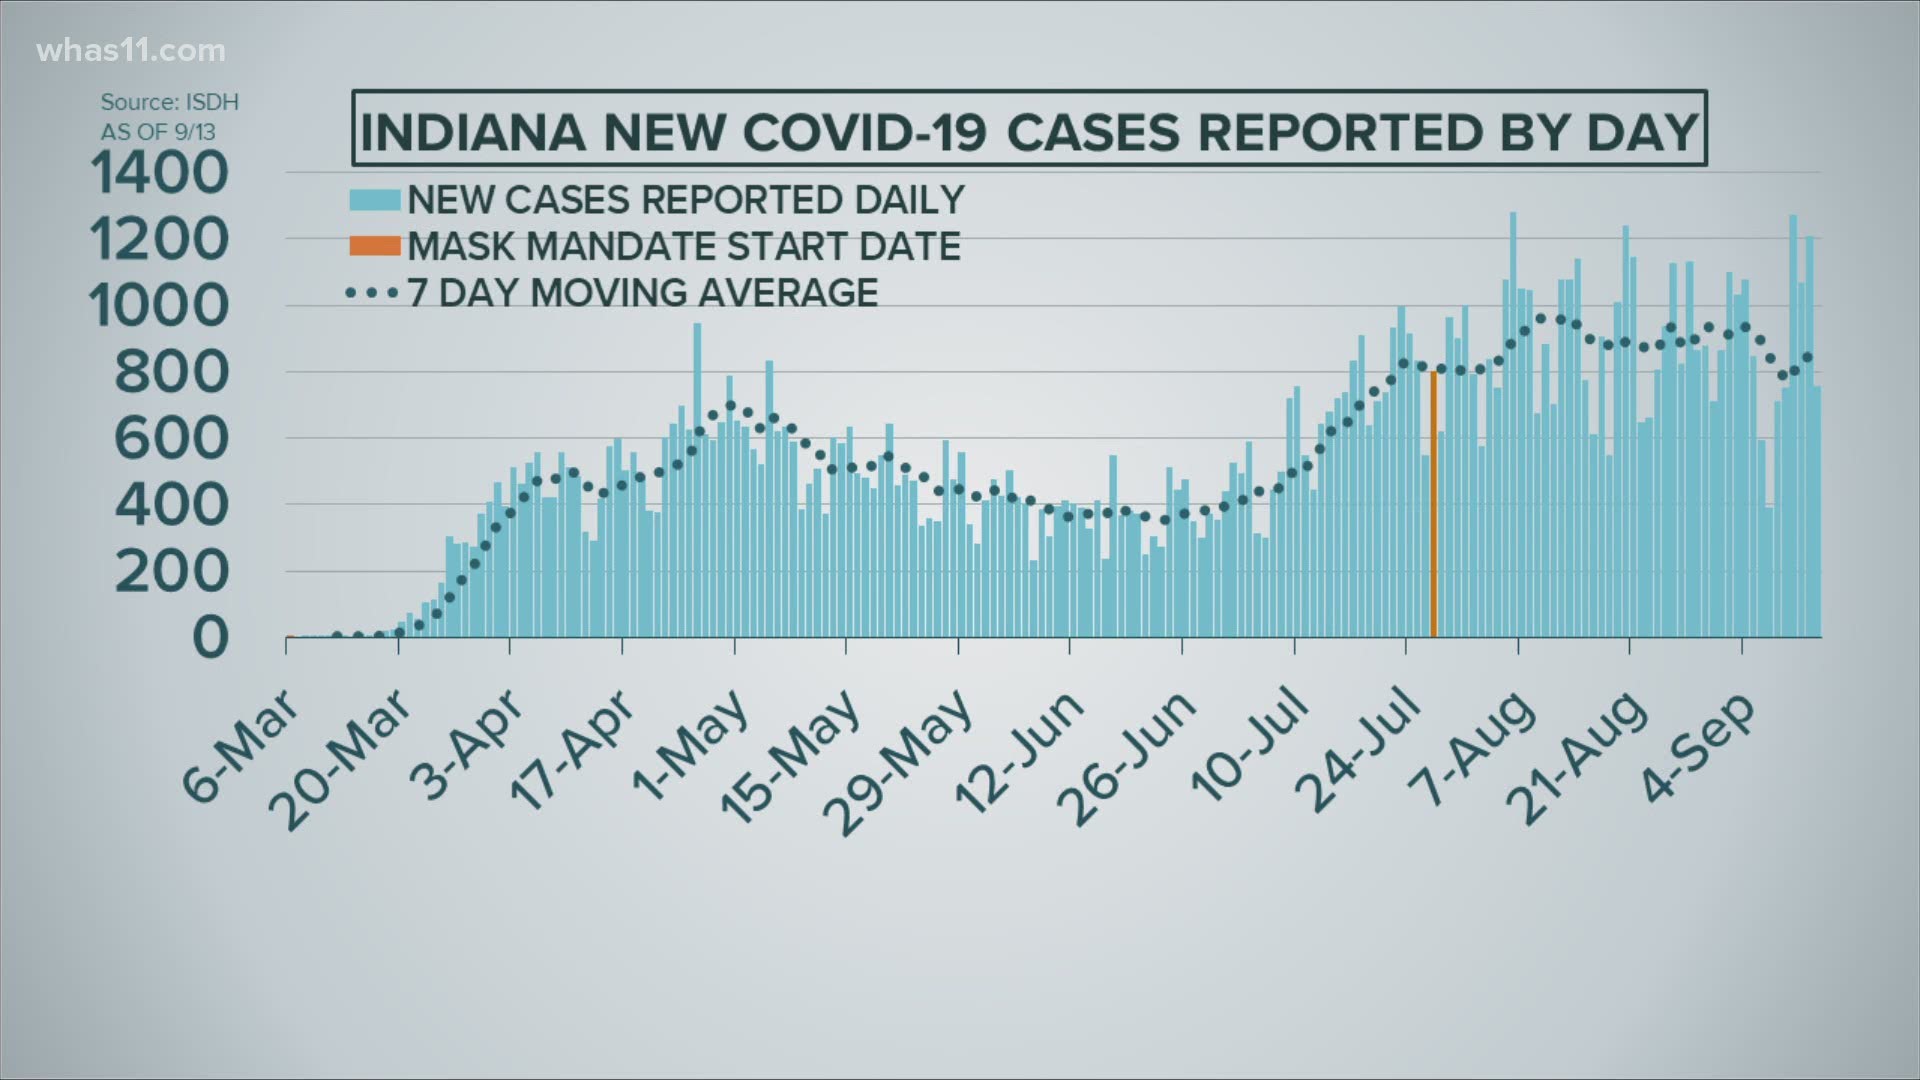 New data shows how cases rose after the mask mandate was put into place.